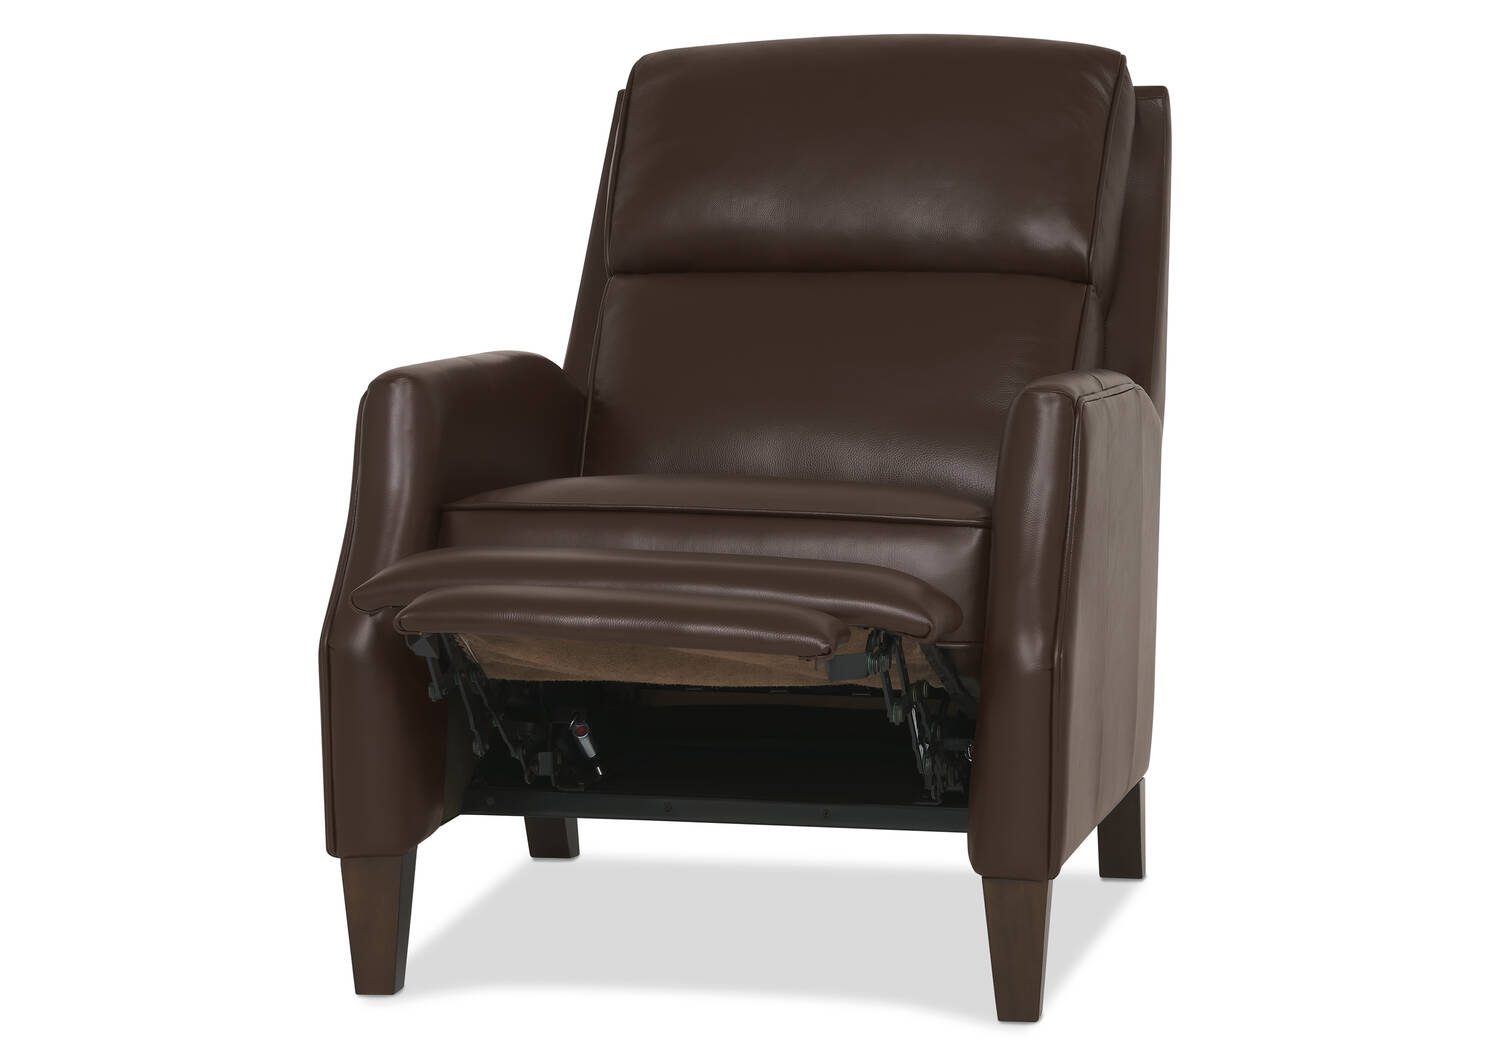 Barret Leather Recliner -Arlo Chocolate